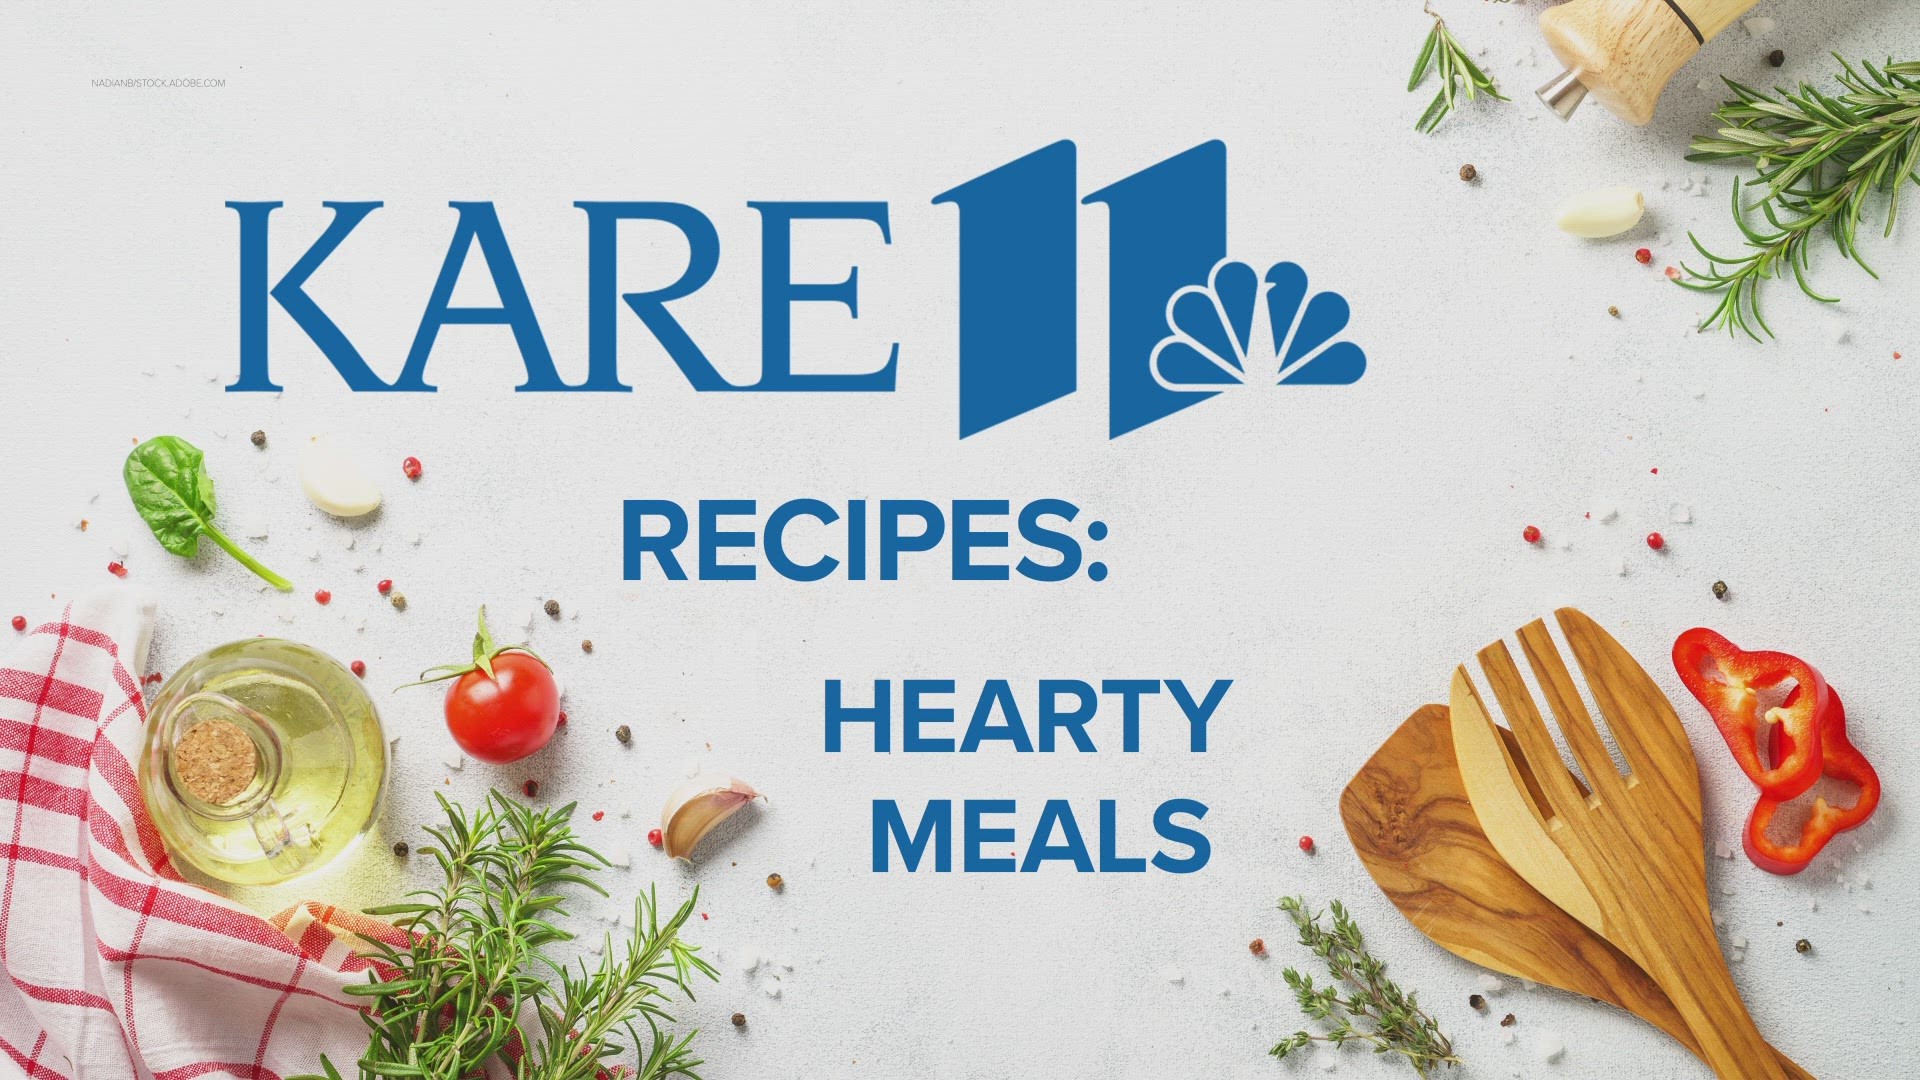 Have a seat at the table as KARE 11 prepares a hearty meal that will stick to your bones.